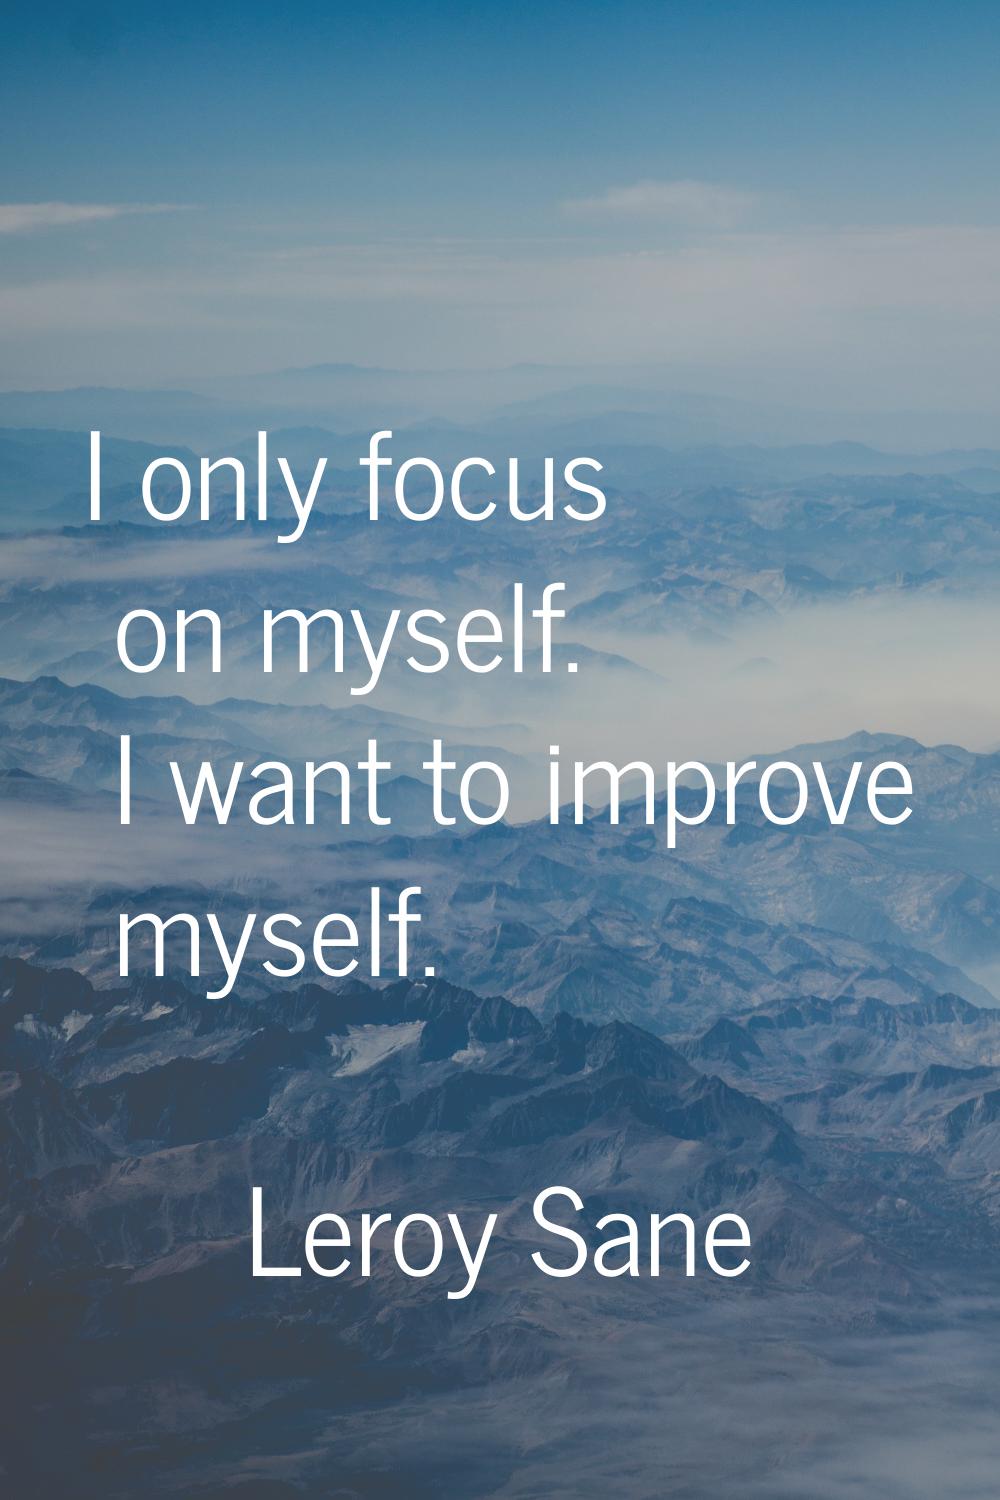 I only focus on myself. I want to improve myself.